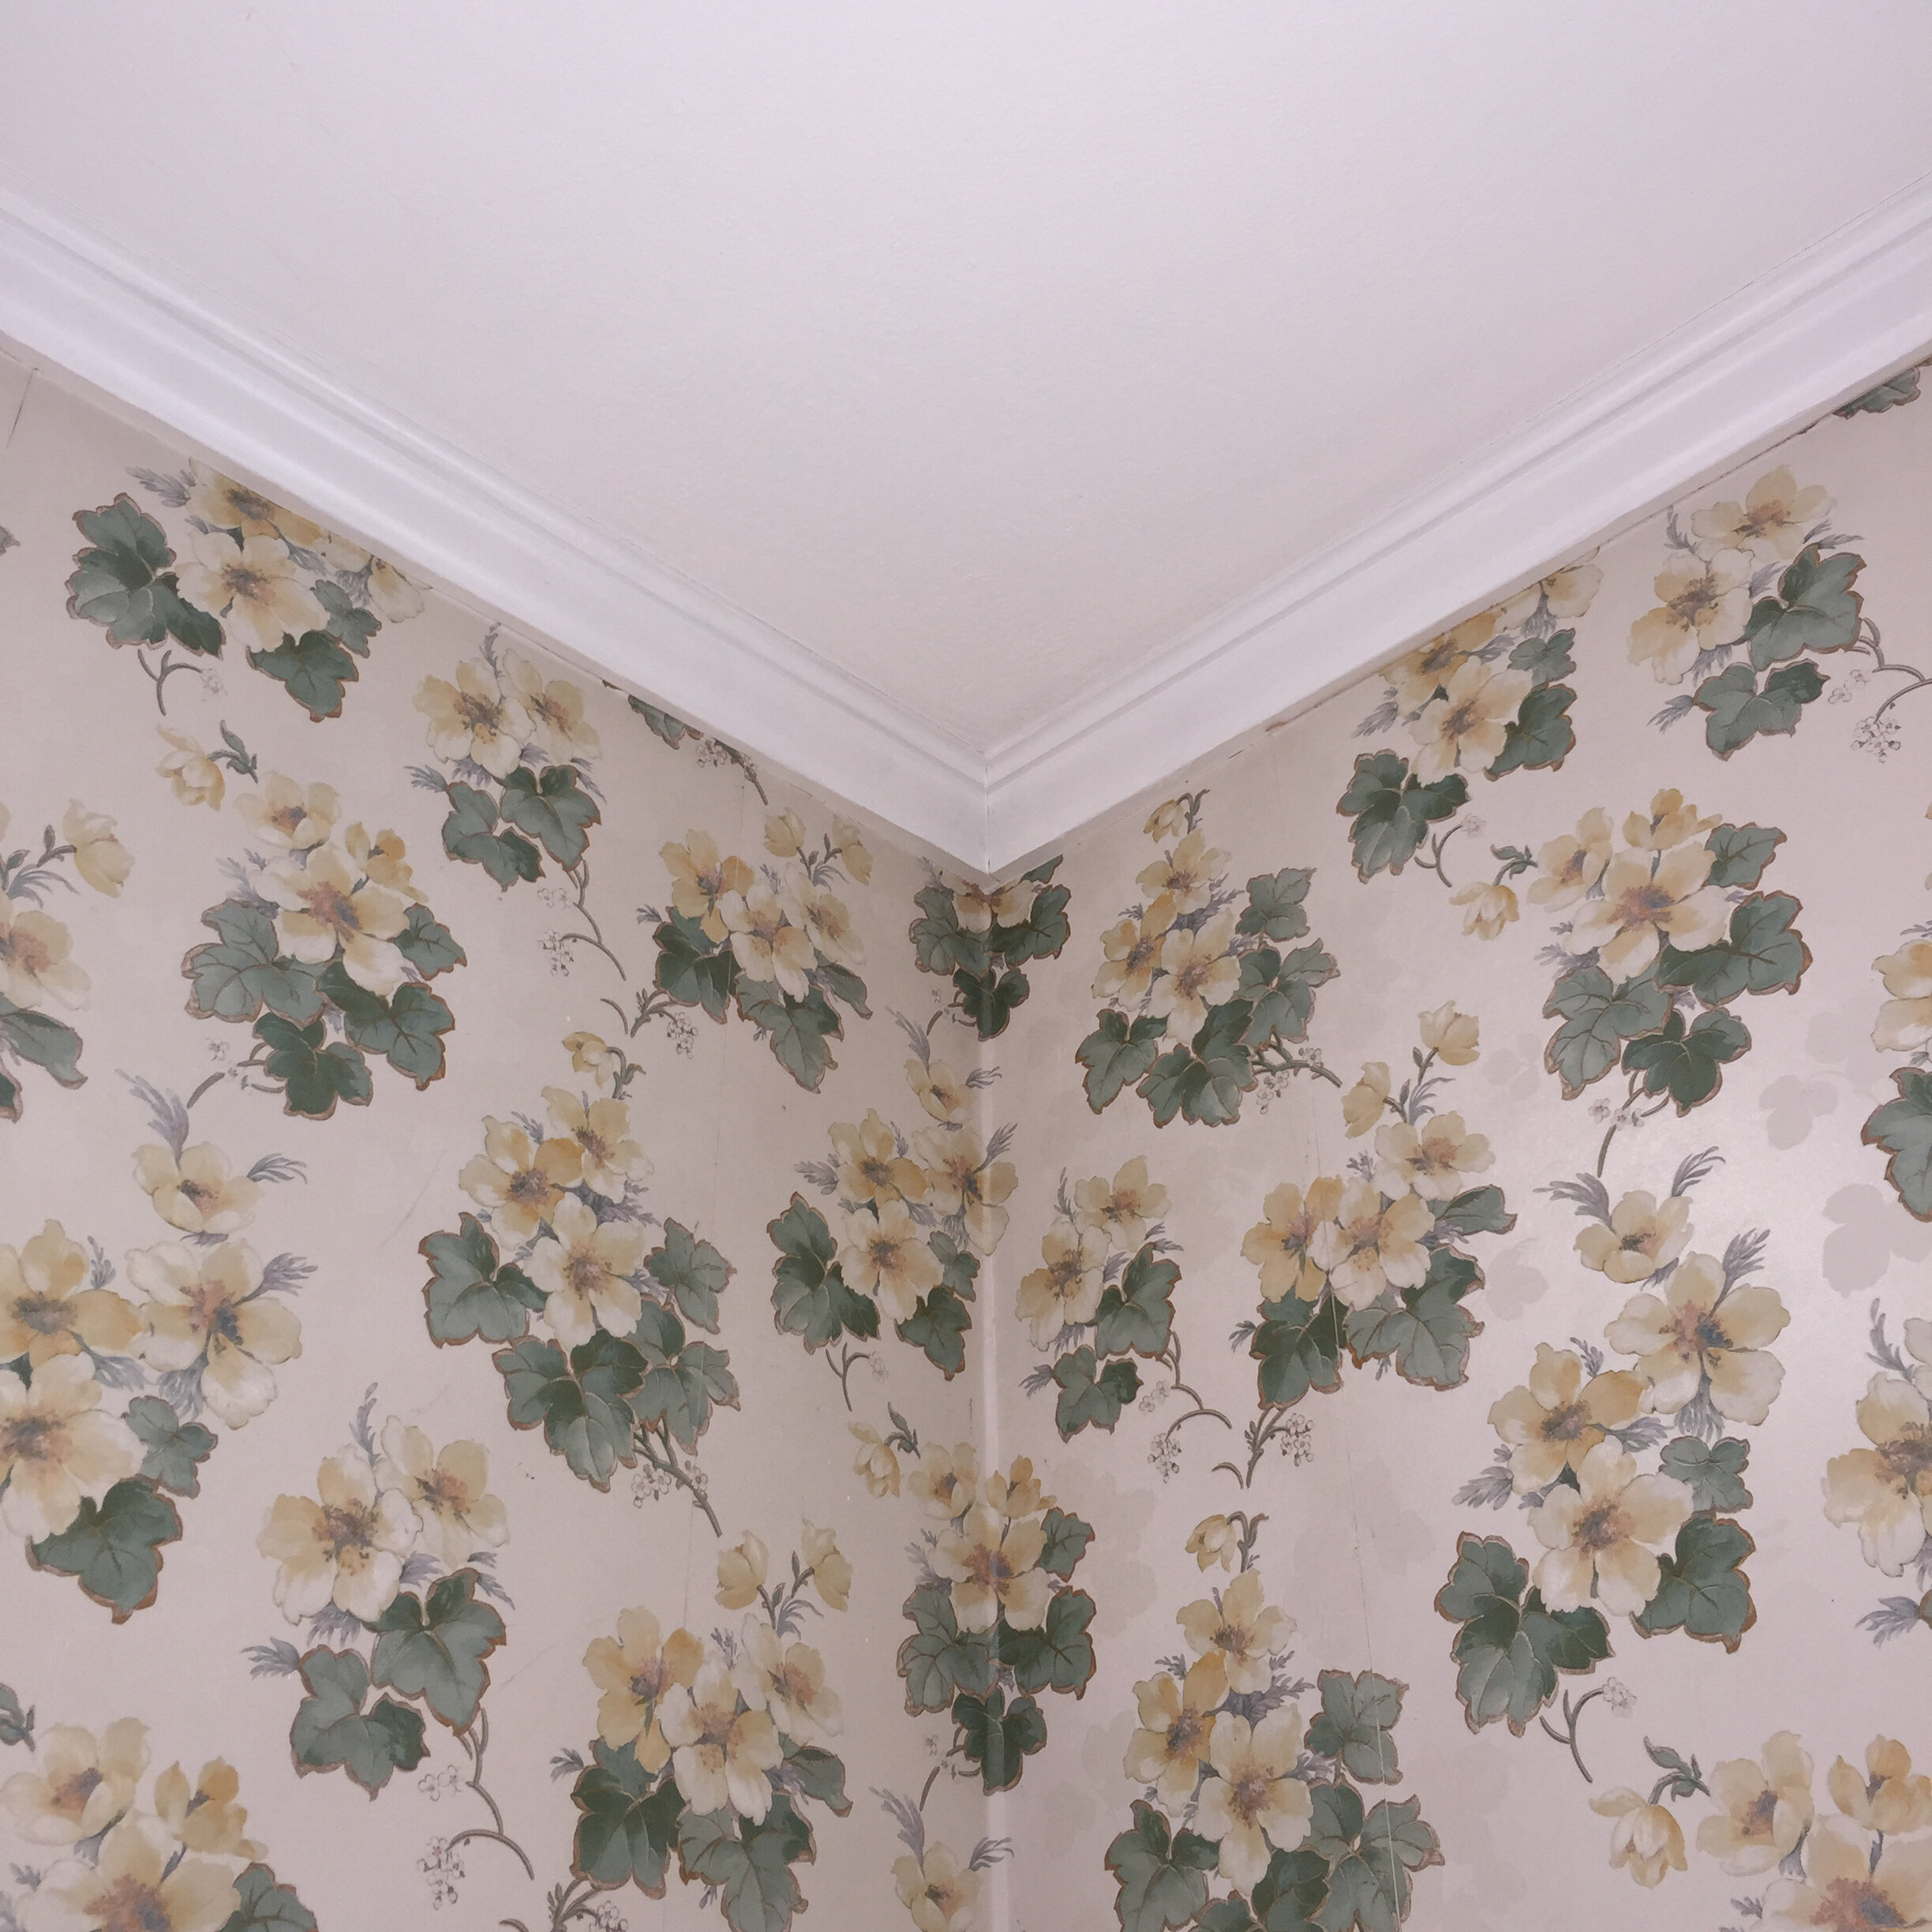  Alice Shaw, “Stuck in the house picture #11” - This is the wallpaper in one of the rooms in my house. I wouldn't have chosen it myself but it has a certain charm.&nbsp; 